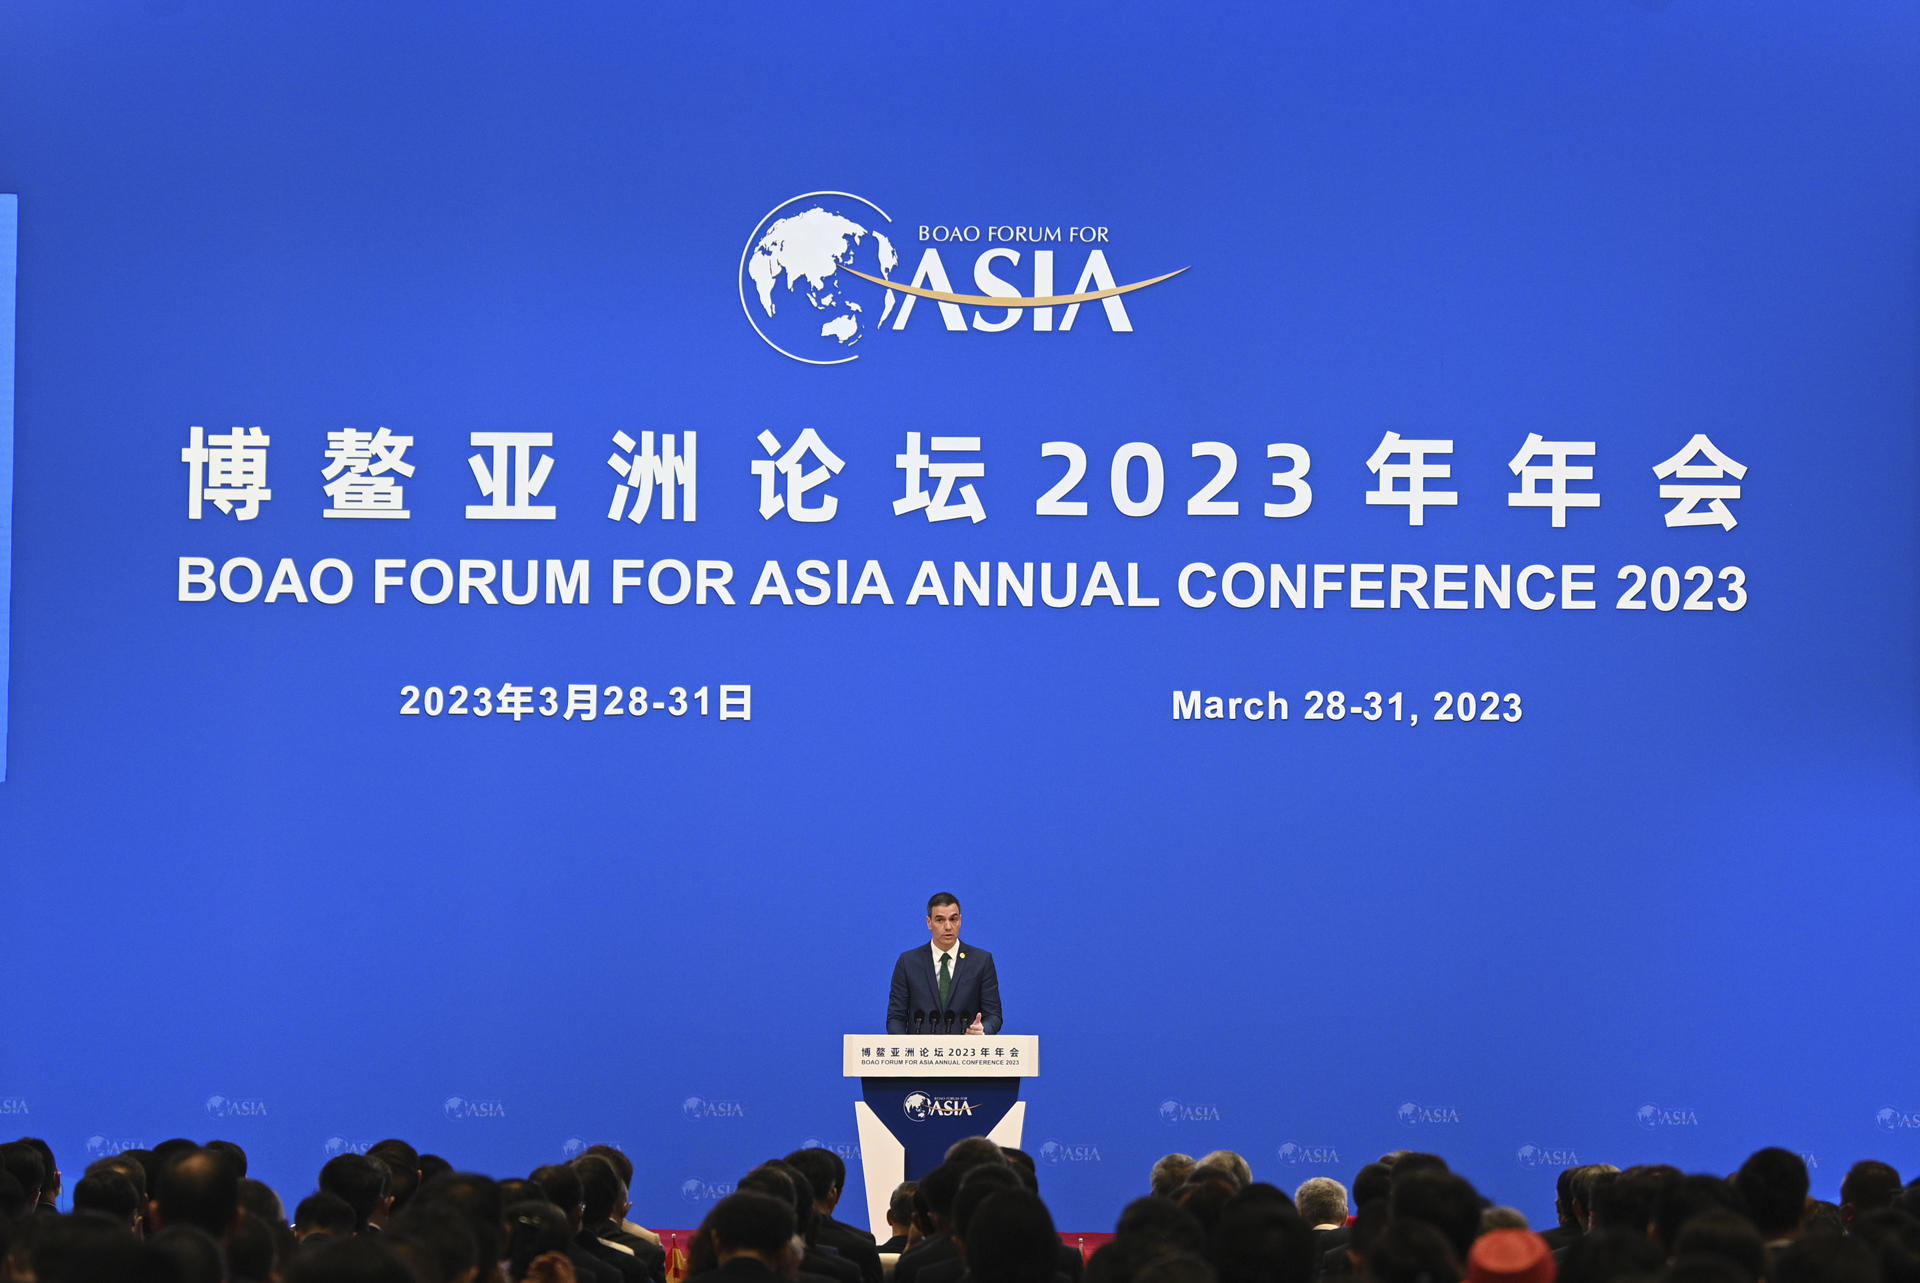 A handout photo of Spanish prime minister, Pedro Sánchez, speaks at the BFA's annual conference in Boao, Hainan Province, China, 30 March 2023. EFE/ Moncloa / Borja Puig de la Bellacasa -ONLY EDITORIAL USE/MANDATORY CREDIT